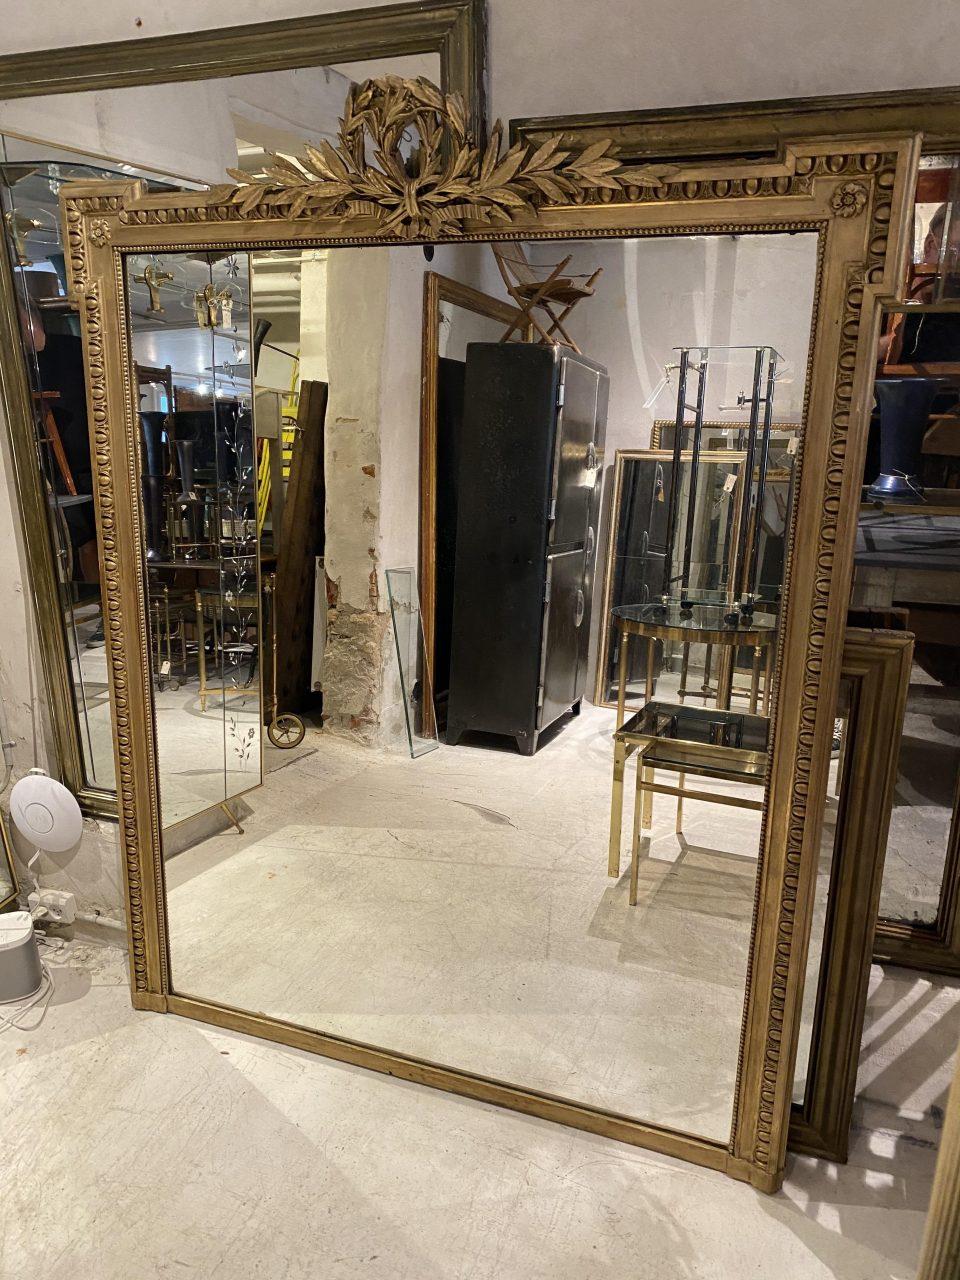 Magnificent and seldom found antique Louis Seize mantlepiece mirror, circa 1850s, France. A beautifully gilded profile frame and wonderful original patina in its mercury mirror glass.

Richly ornamented with many details, such as a double victory